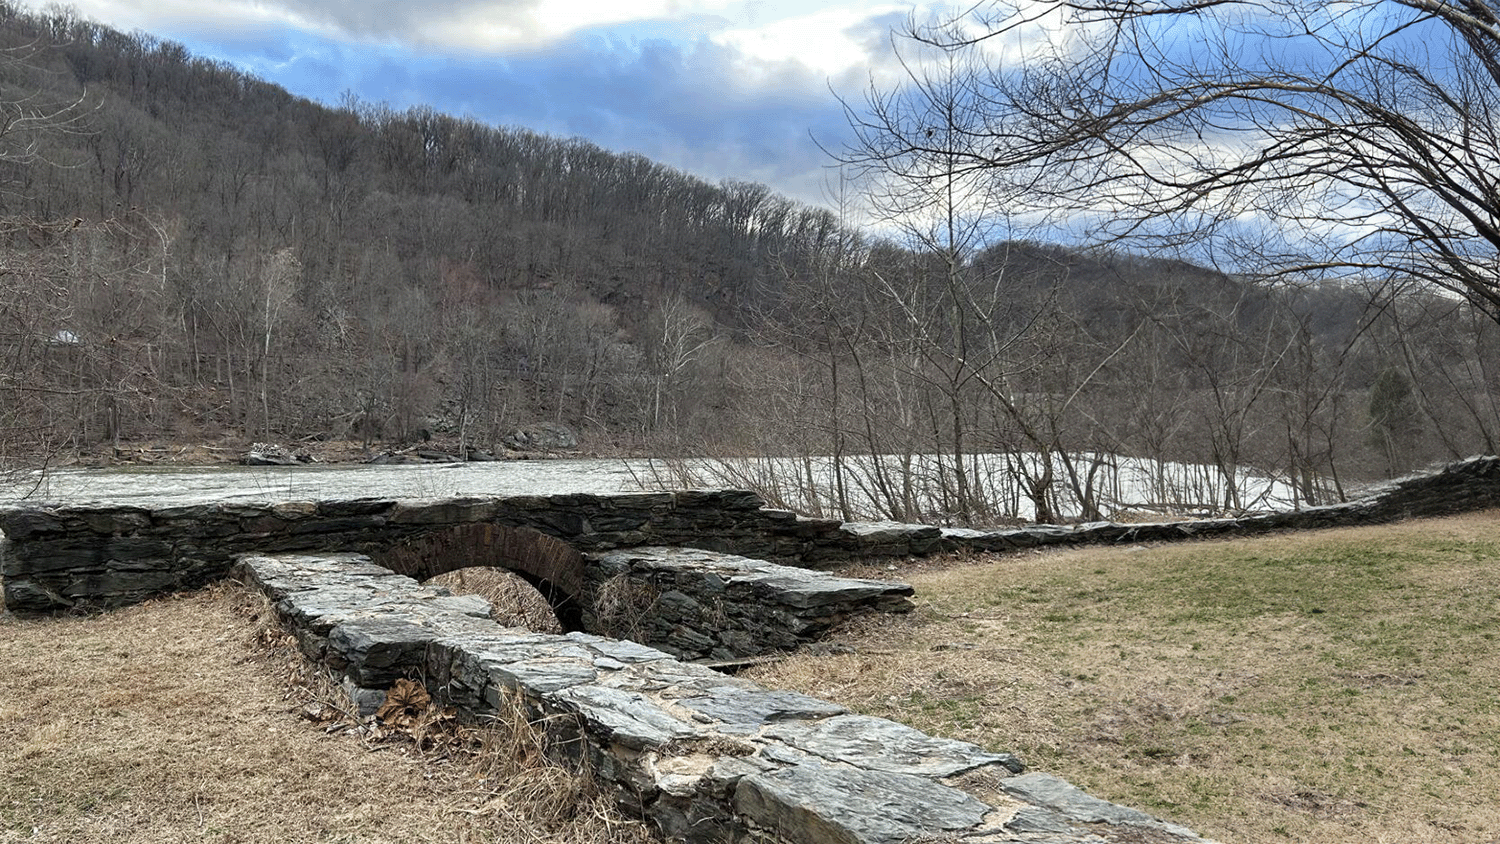 Amanda Martin: Mystery at Harpers Ferry